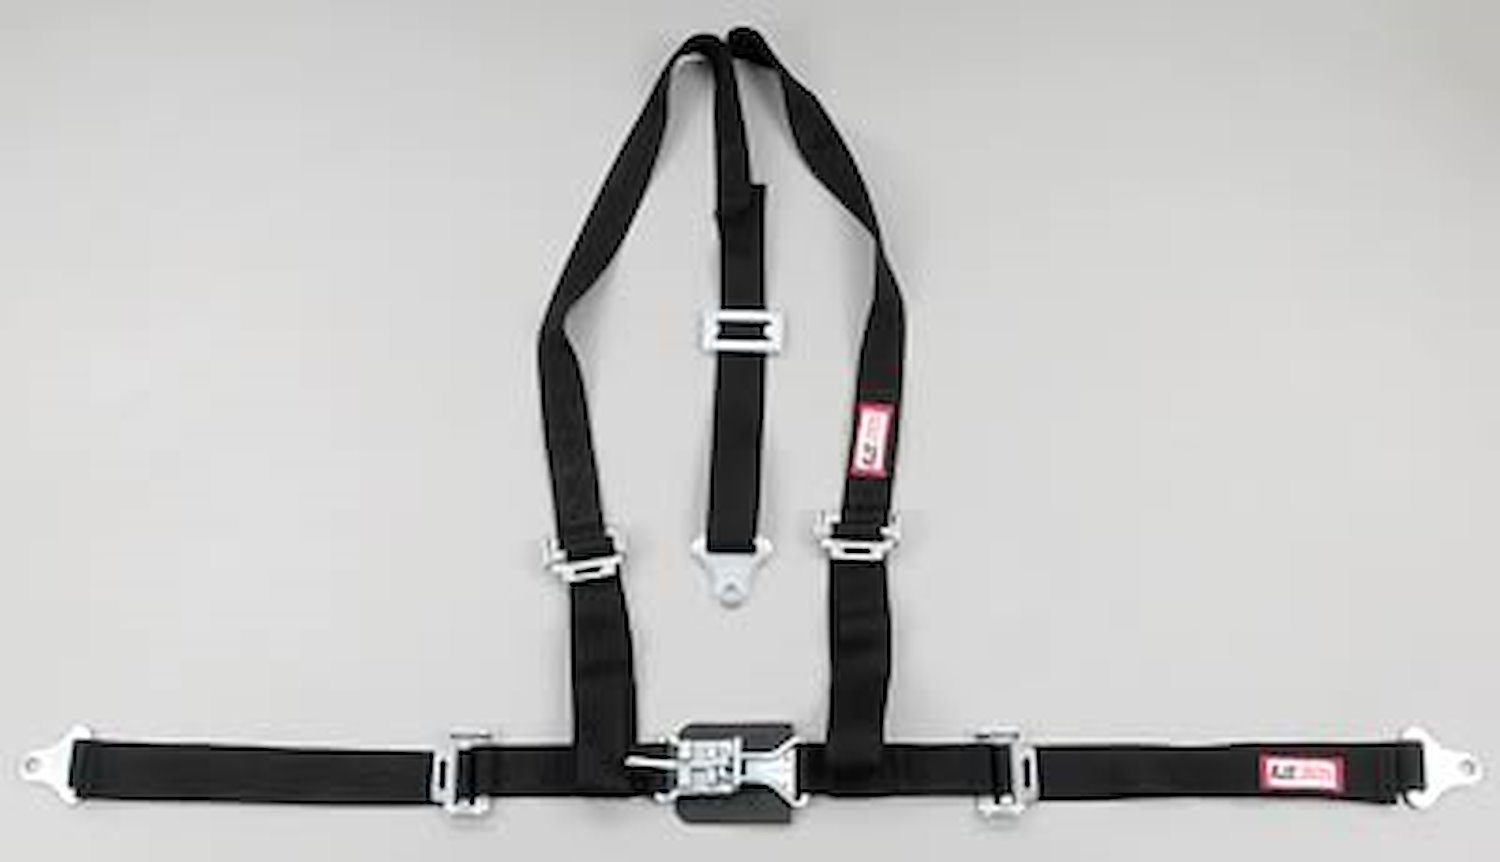 NON-SFI L&L HARNESS 2 PULL UP Lap Belt SNAP SEWN IN 2 S.H. Y FLOOR Mount WRAP/BOLT BLACK